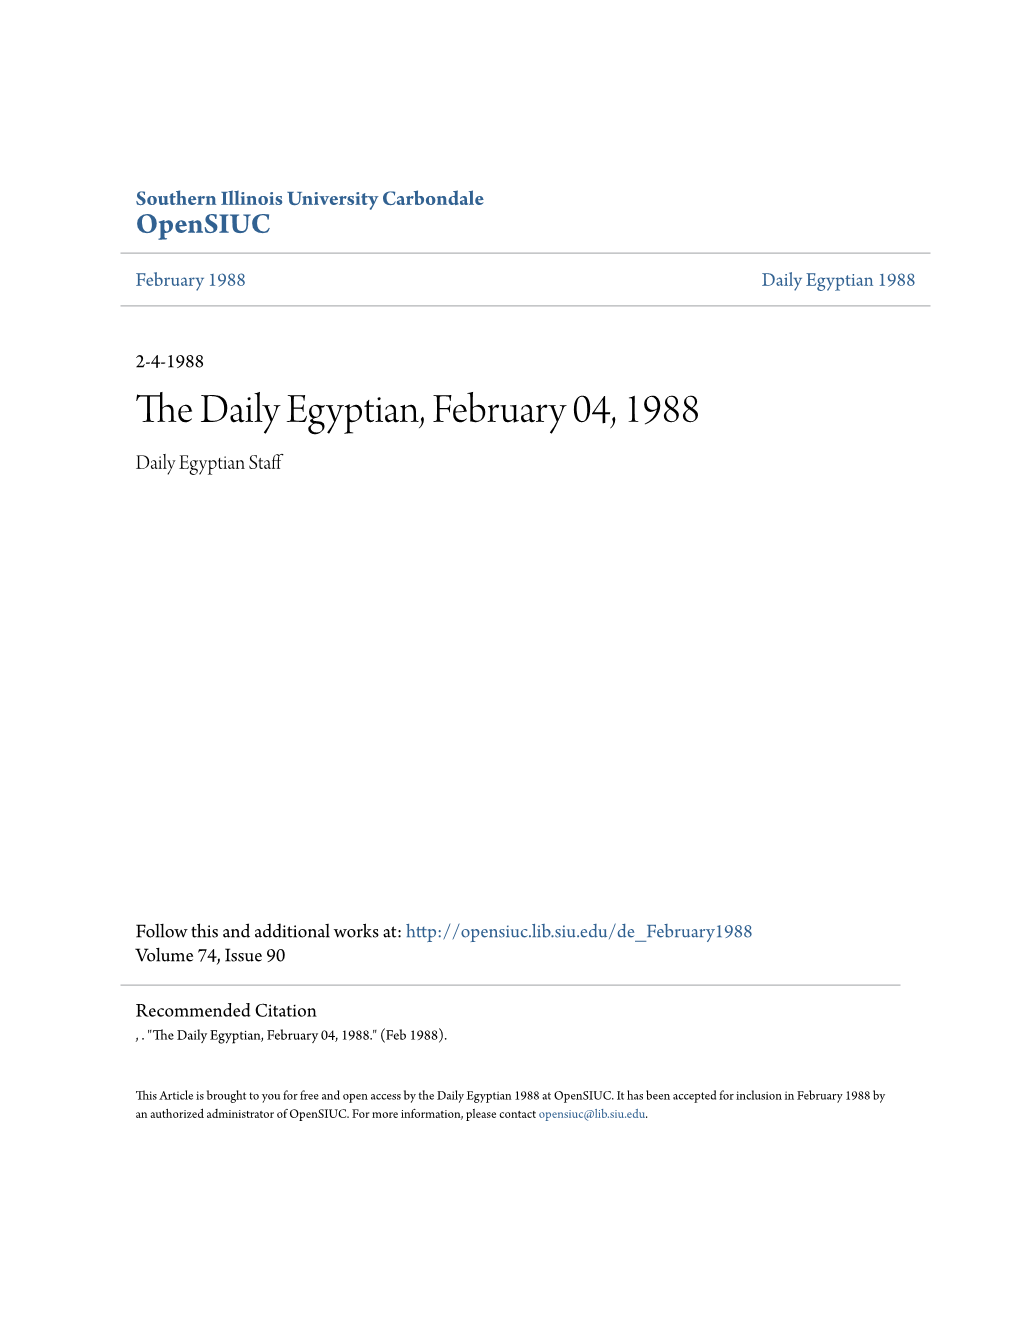 The Daily Egyptian, February 04, 1988